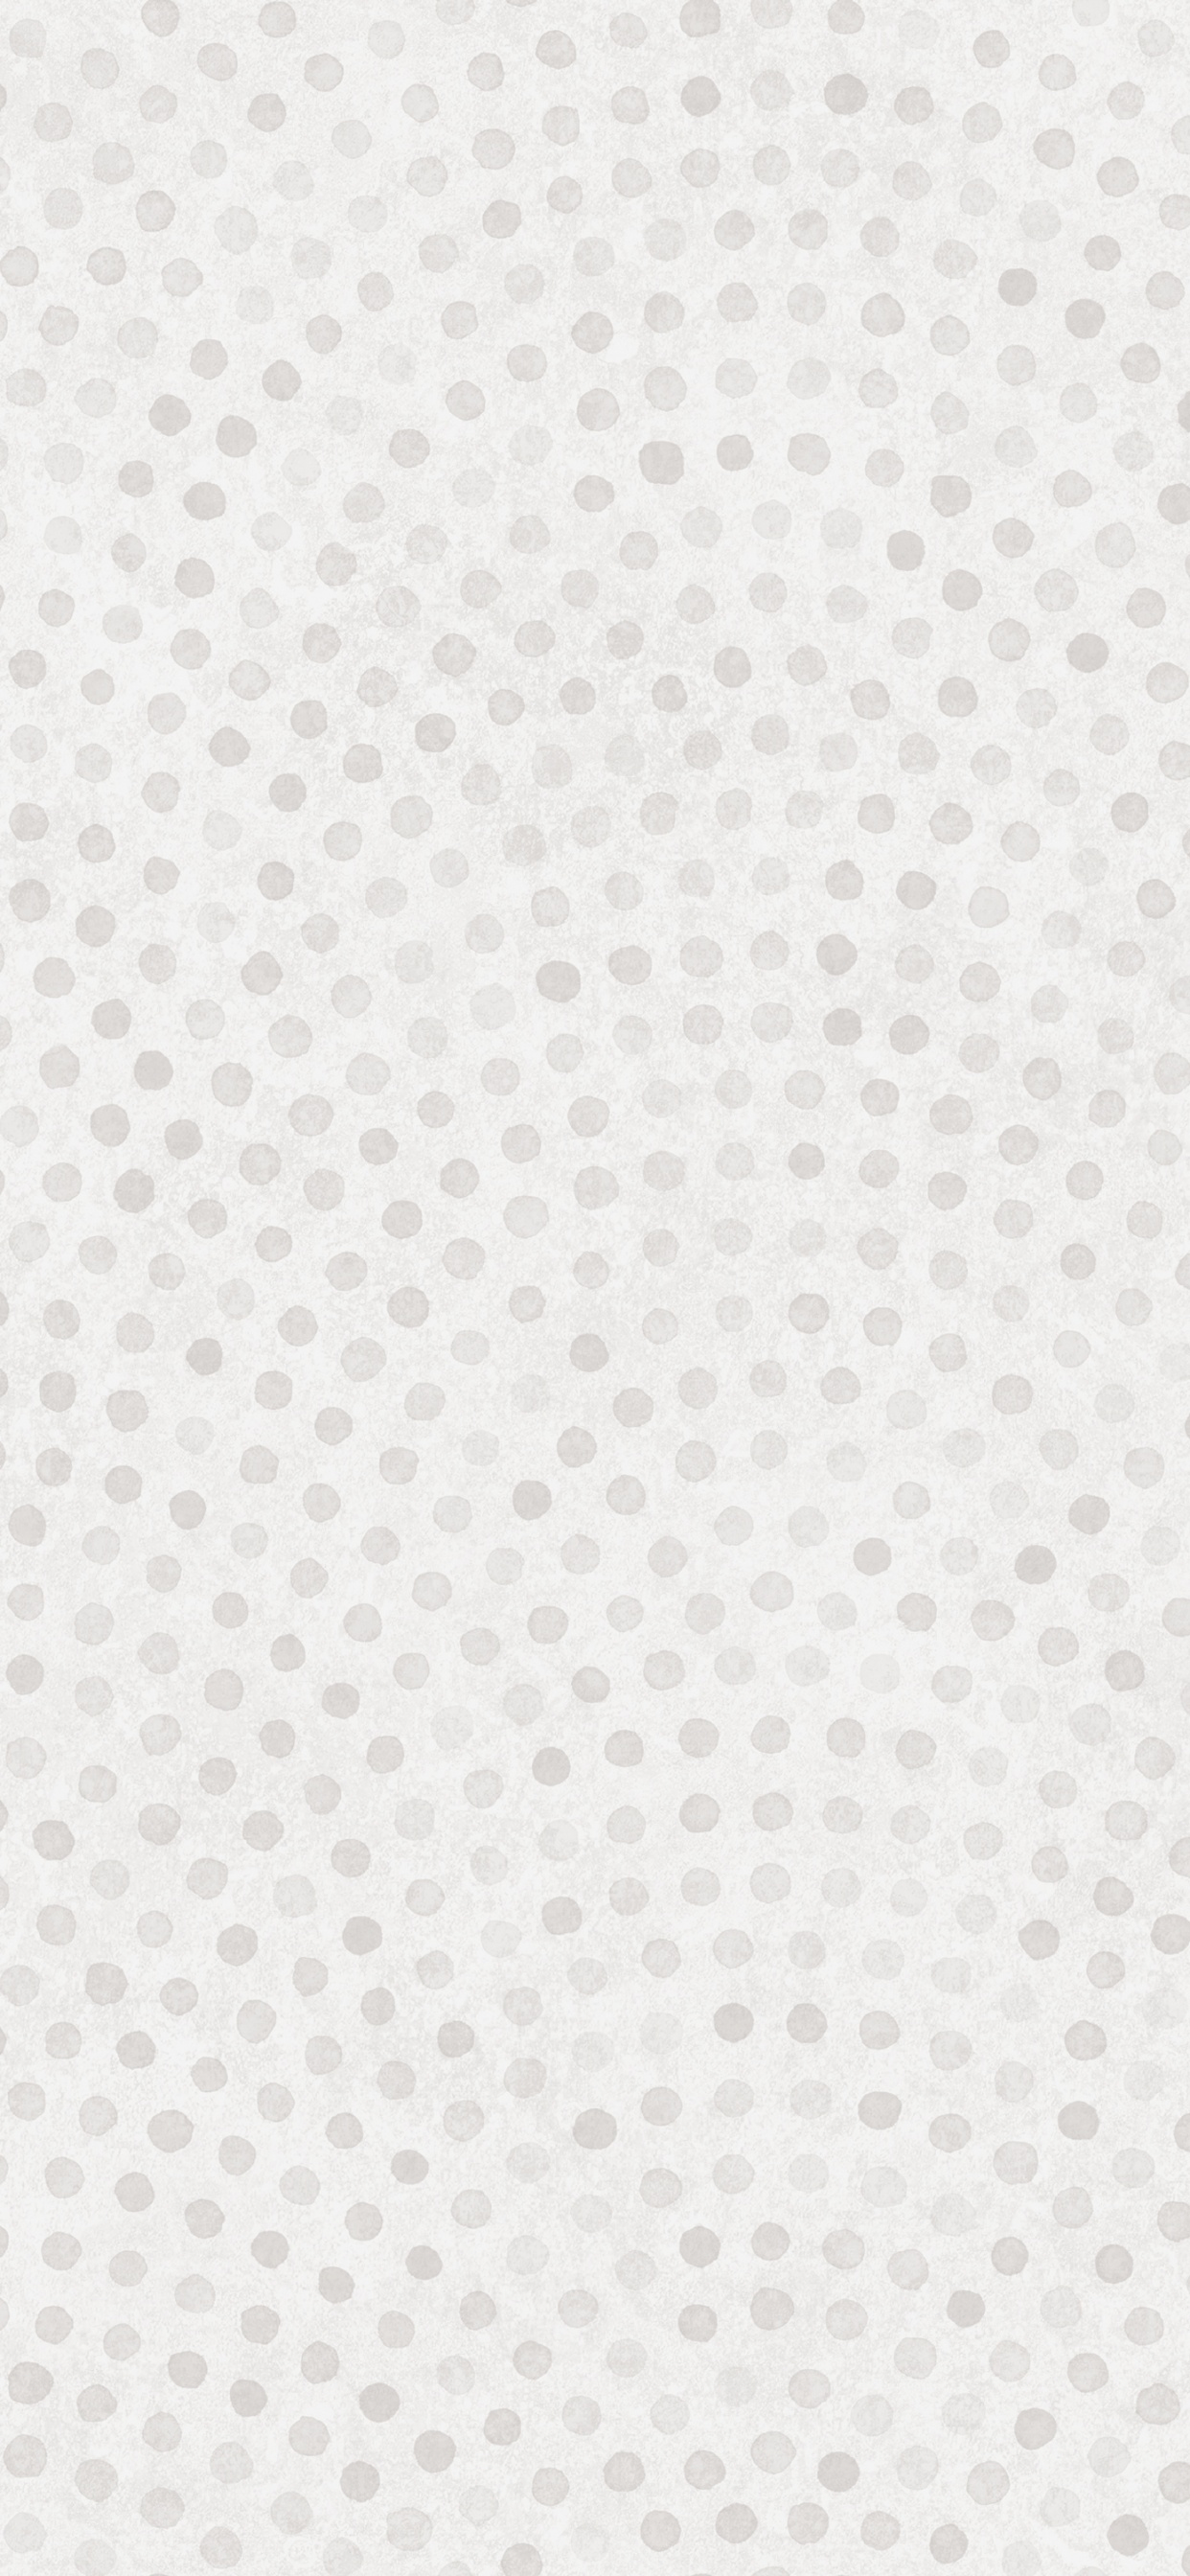 White and Black Polka Dot Textile. Wallpaper in 1242x2688 Resolution